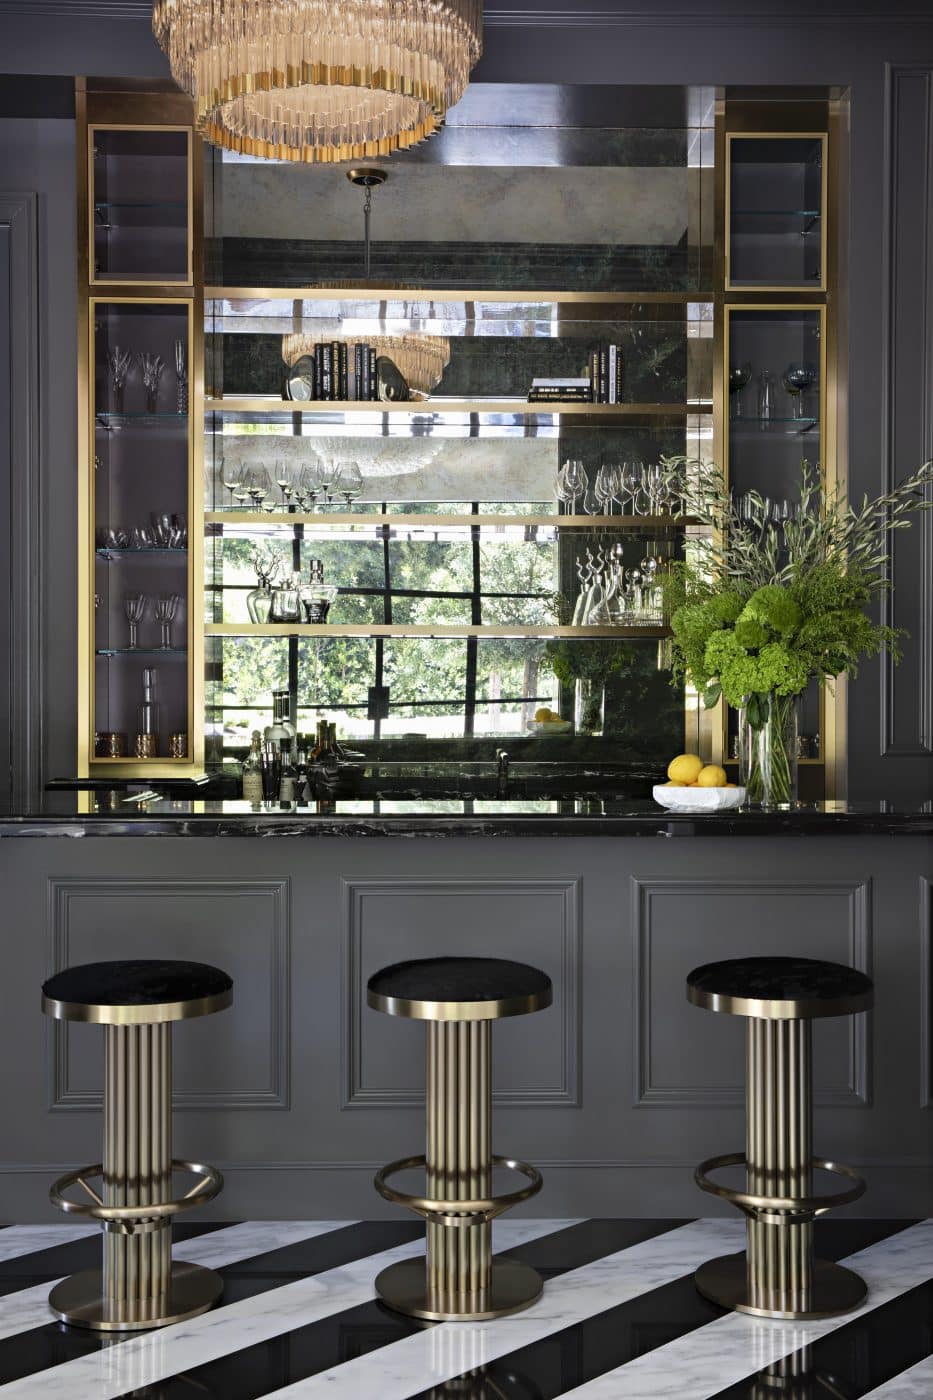 Painted a rich charcoal, the bar and game room features sleek stools and black-and-white marble floors laid in a diagonal pattern.